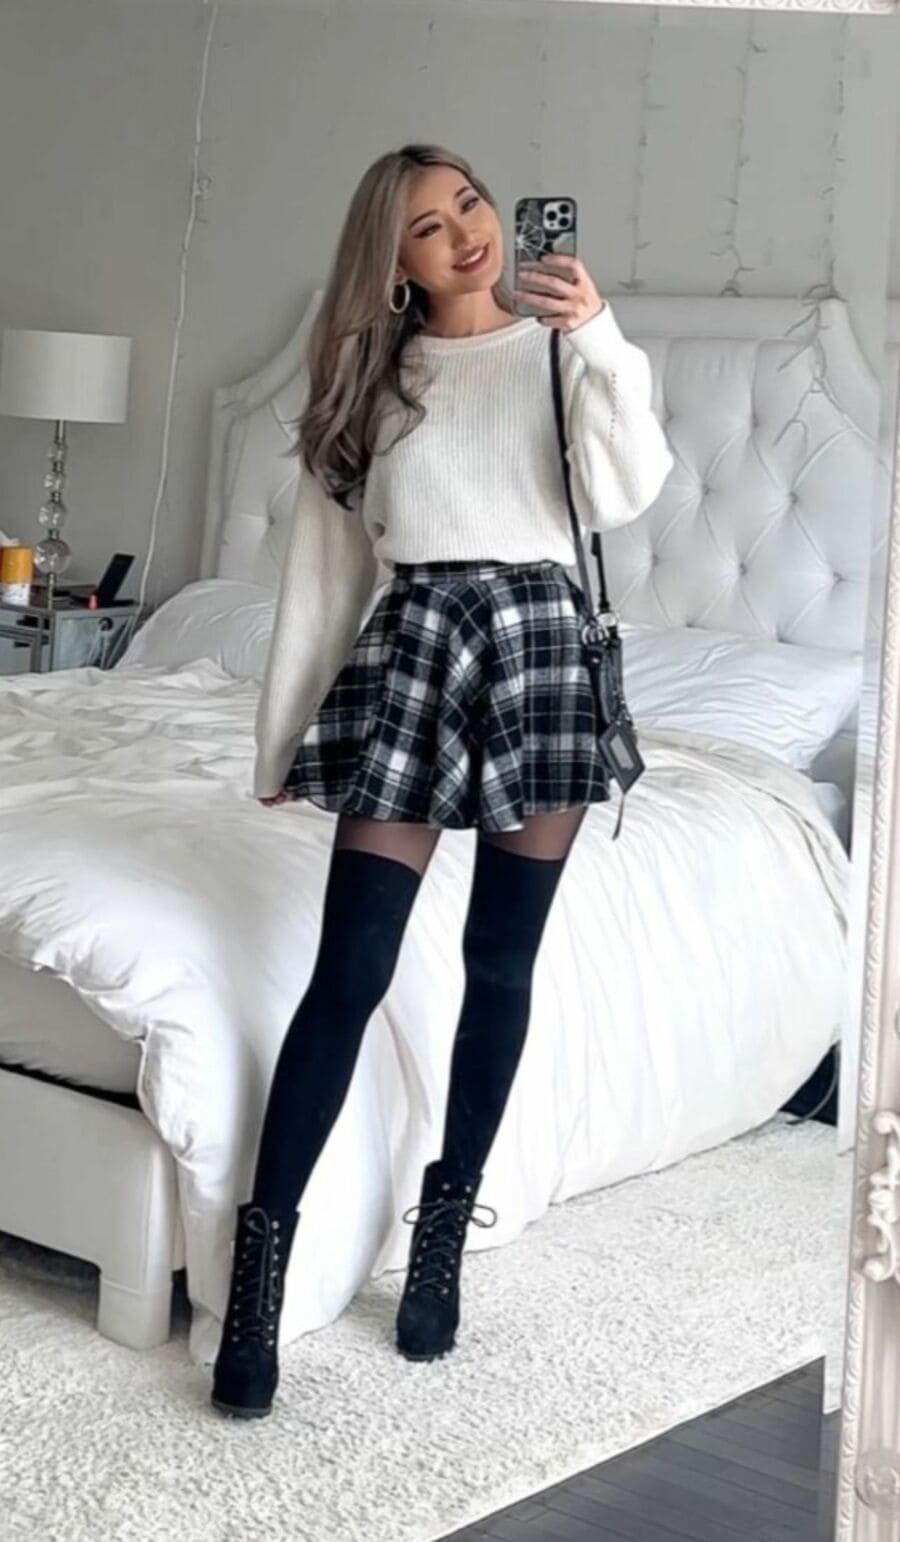 How to Style Black Plaid Skirt: Best 13 Stylish & Breezy Outfits for Ladies